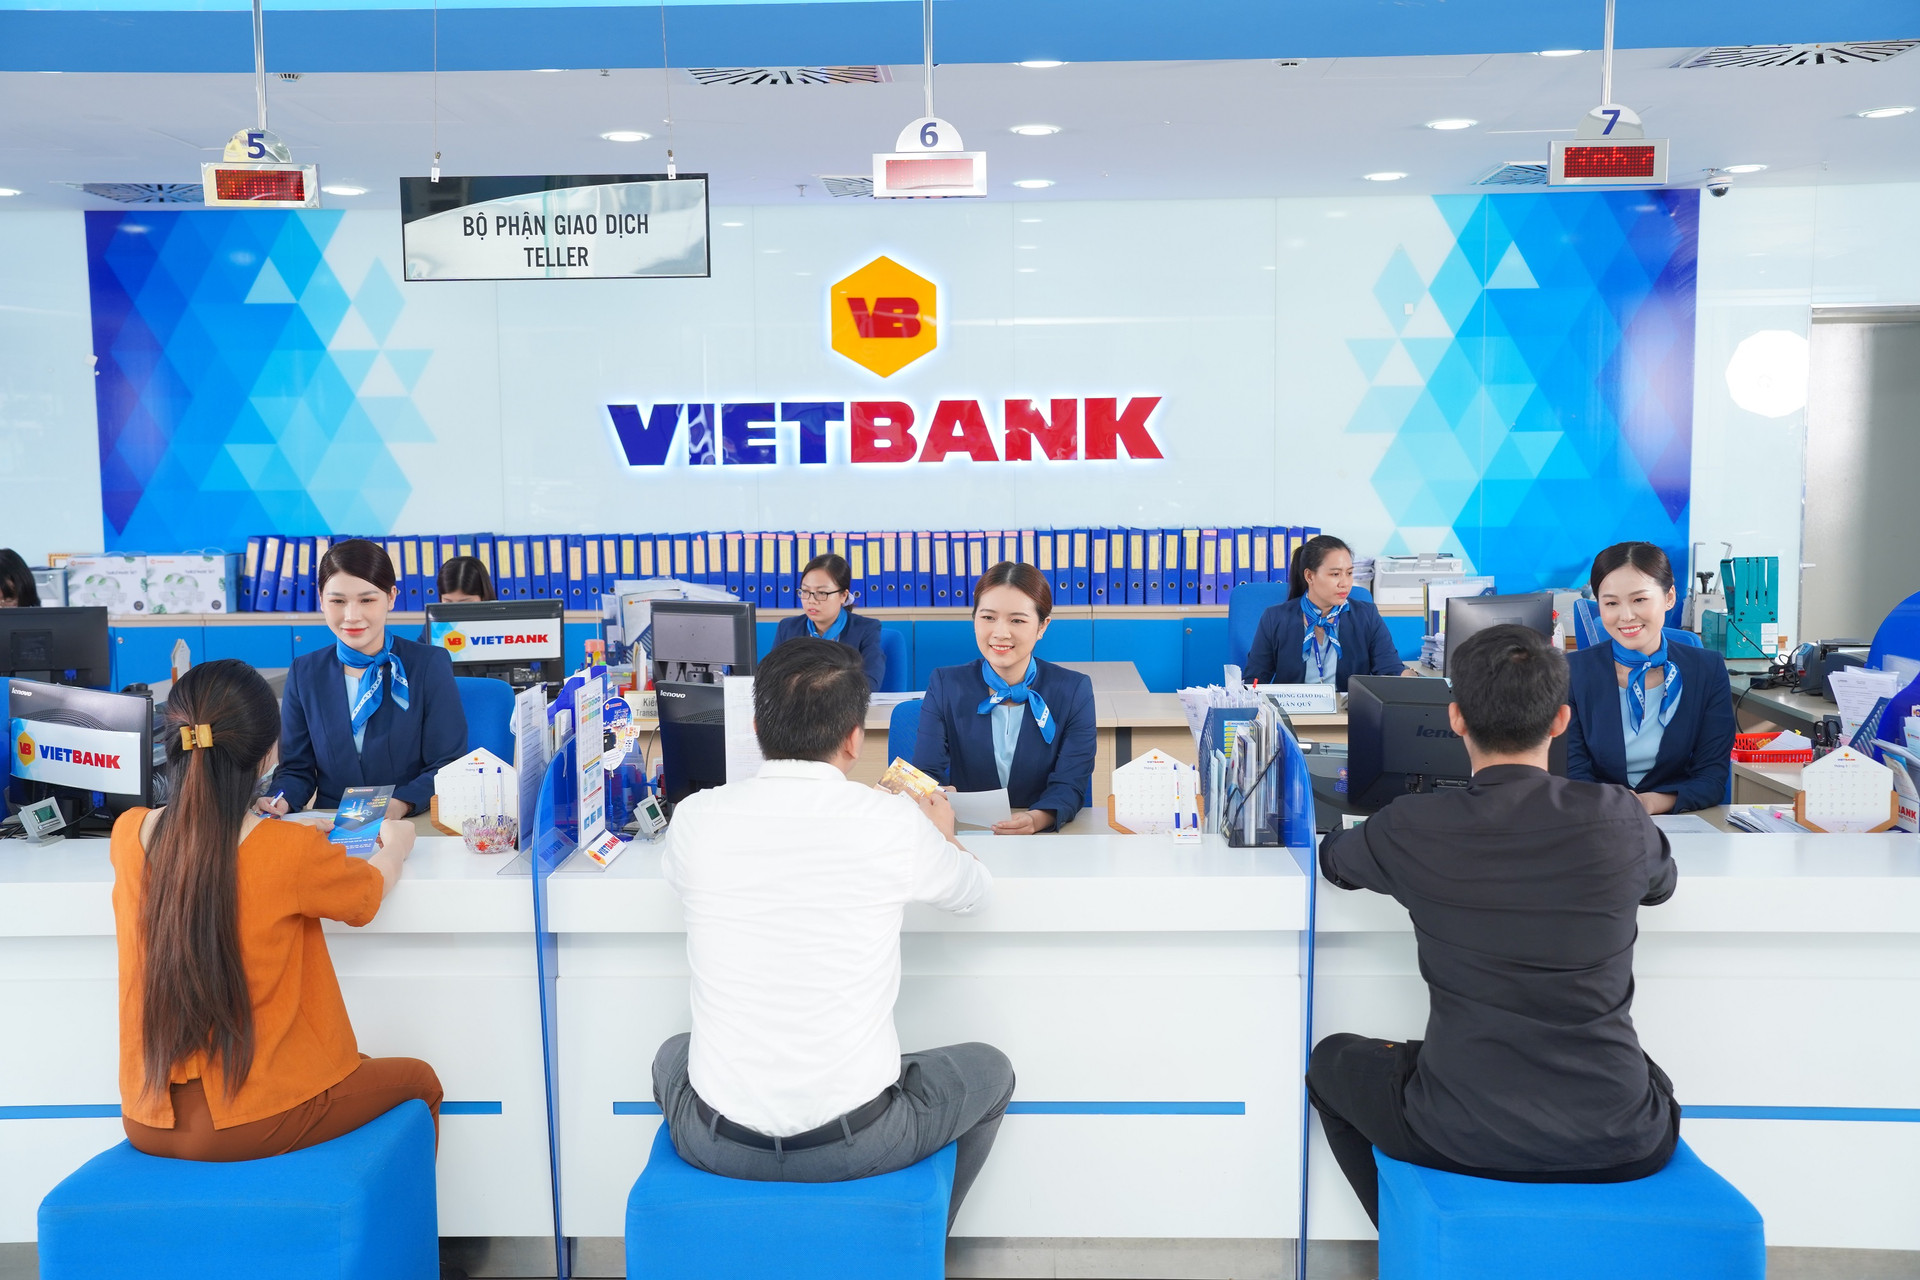 3-vietbank-canh-giao-dich.jpg